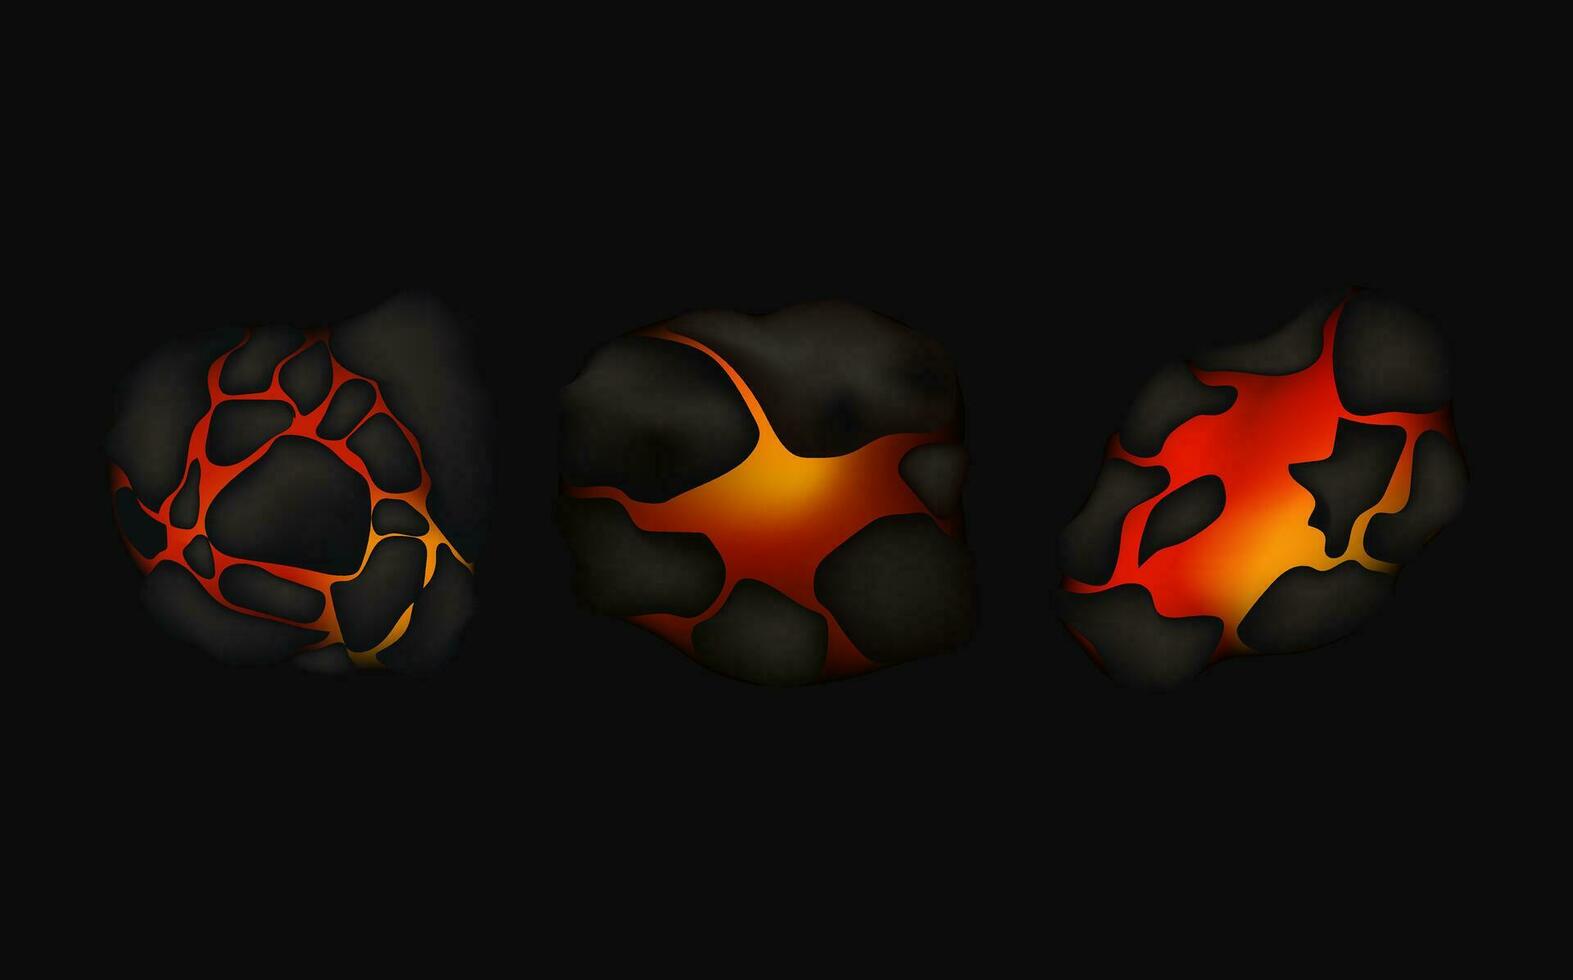 Stylized abstract background of volcano magma glow texture in cracking holes.Destroyed earth surface and flowing lava. vector